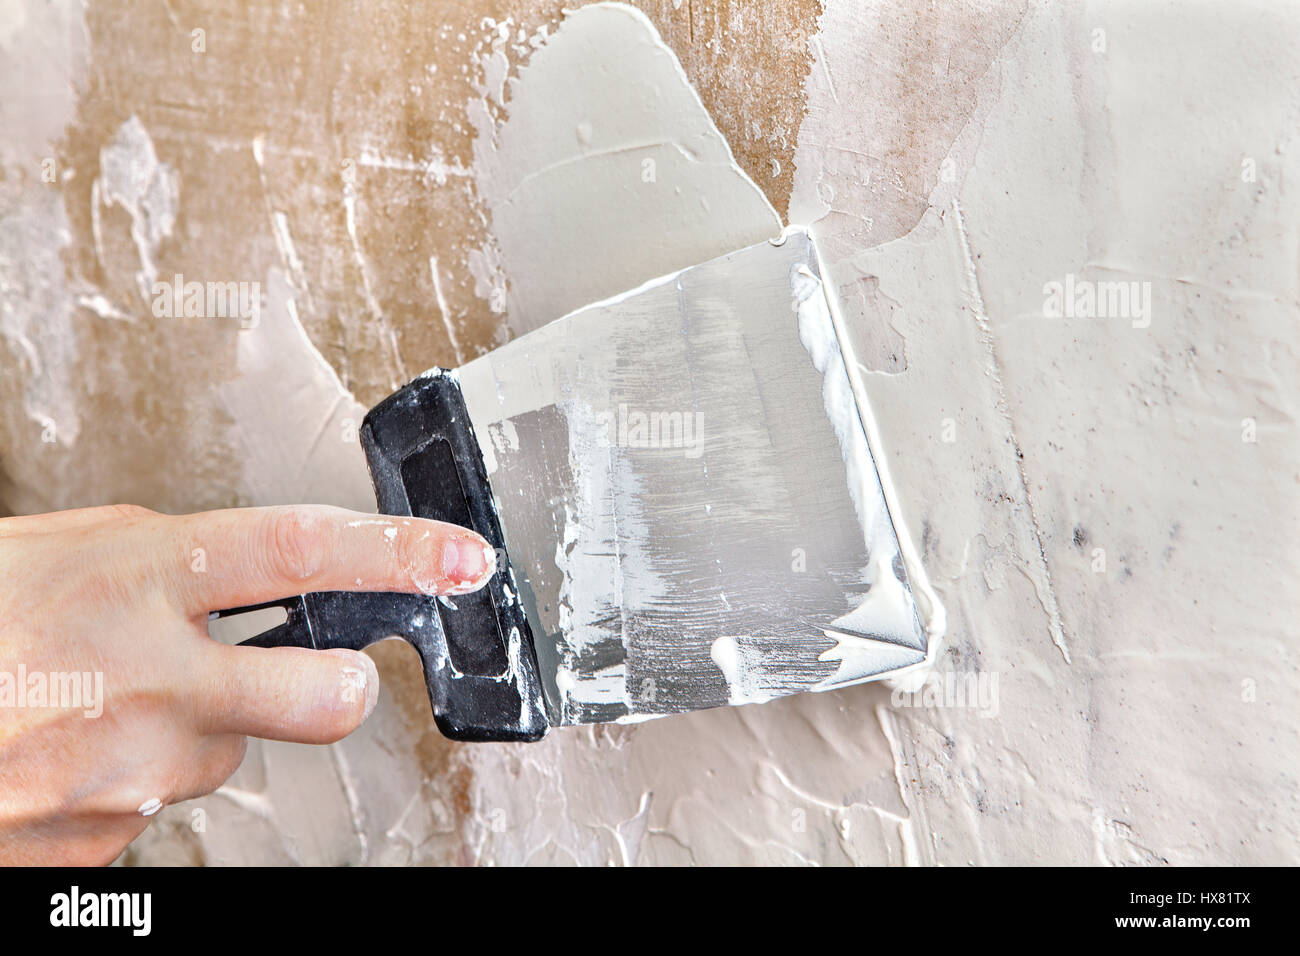 Painting worker puttied wall using a paint spatula hand closeup. Stock Photo